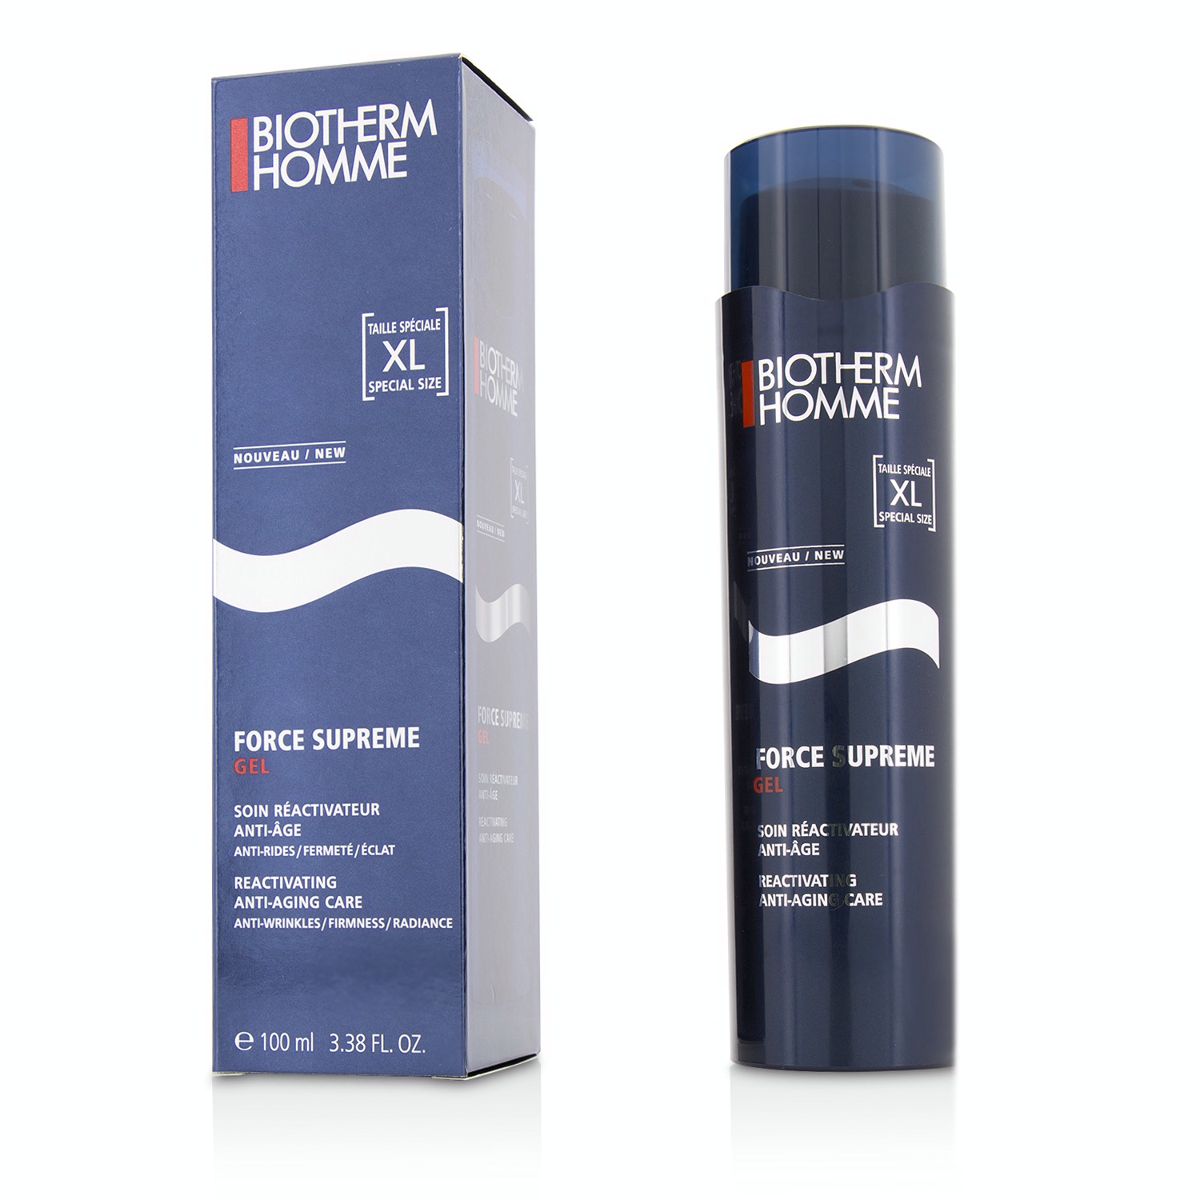 Homme Force Supreme Total Reactivator Anti Aging Gel Care Biotherm Image